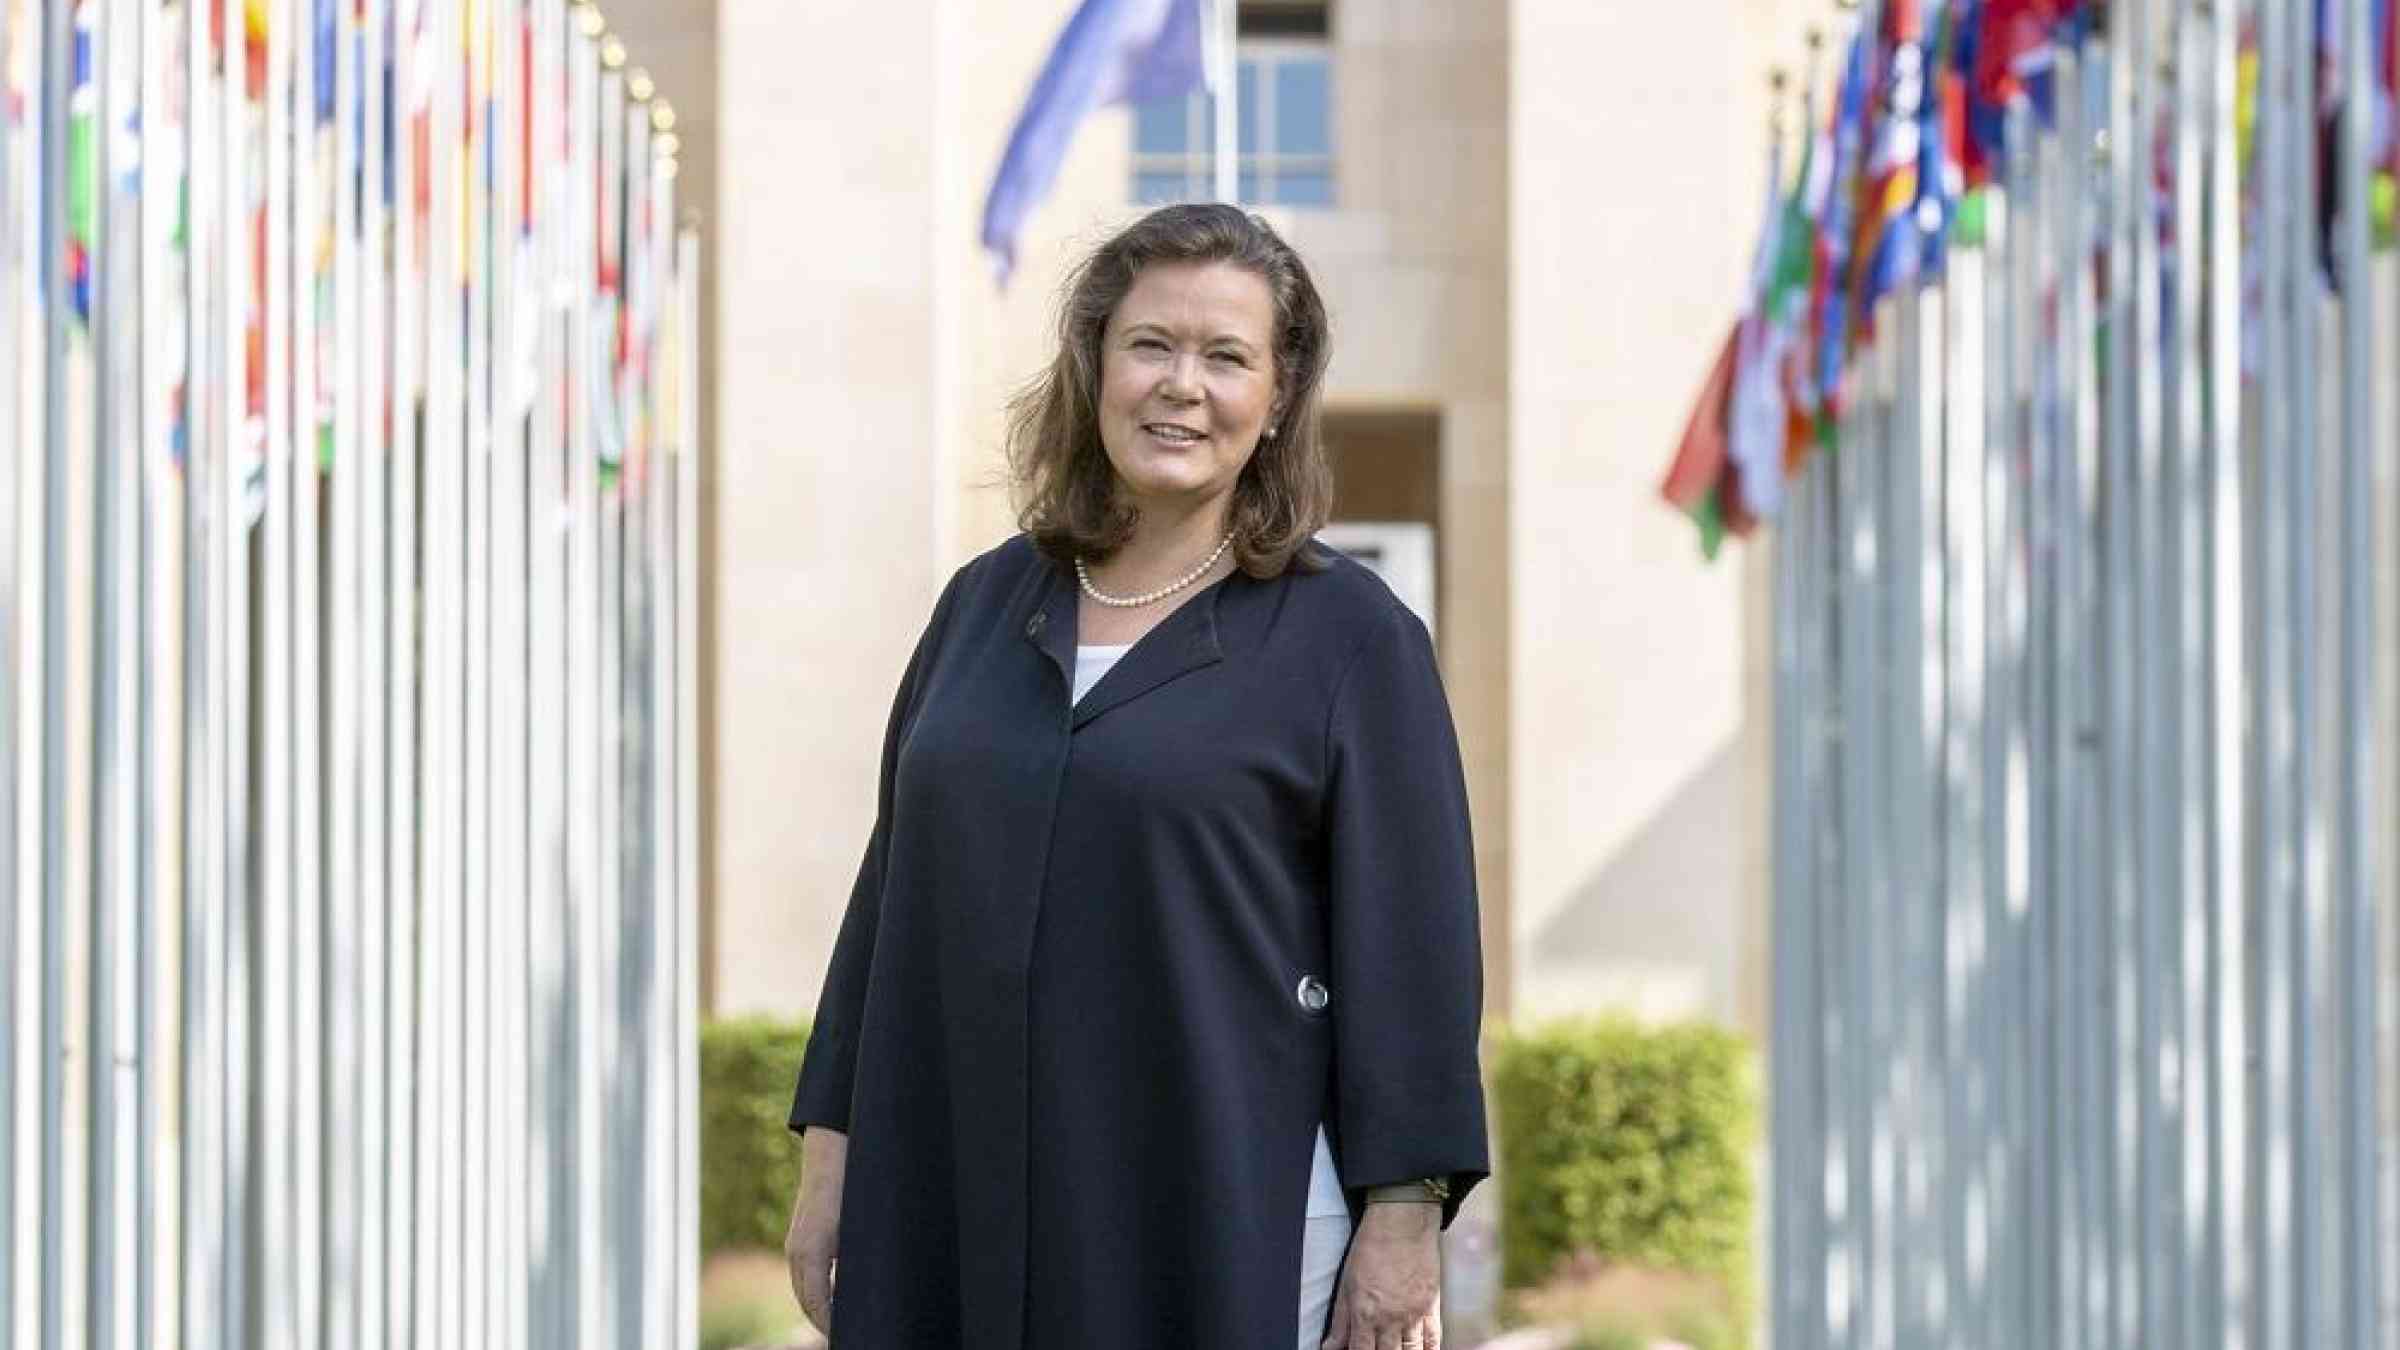 UNDDR Director Kirsi Madi who is now joining Unicef as Chief of Staff